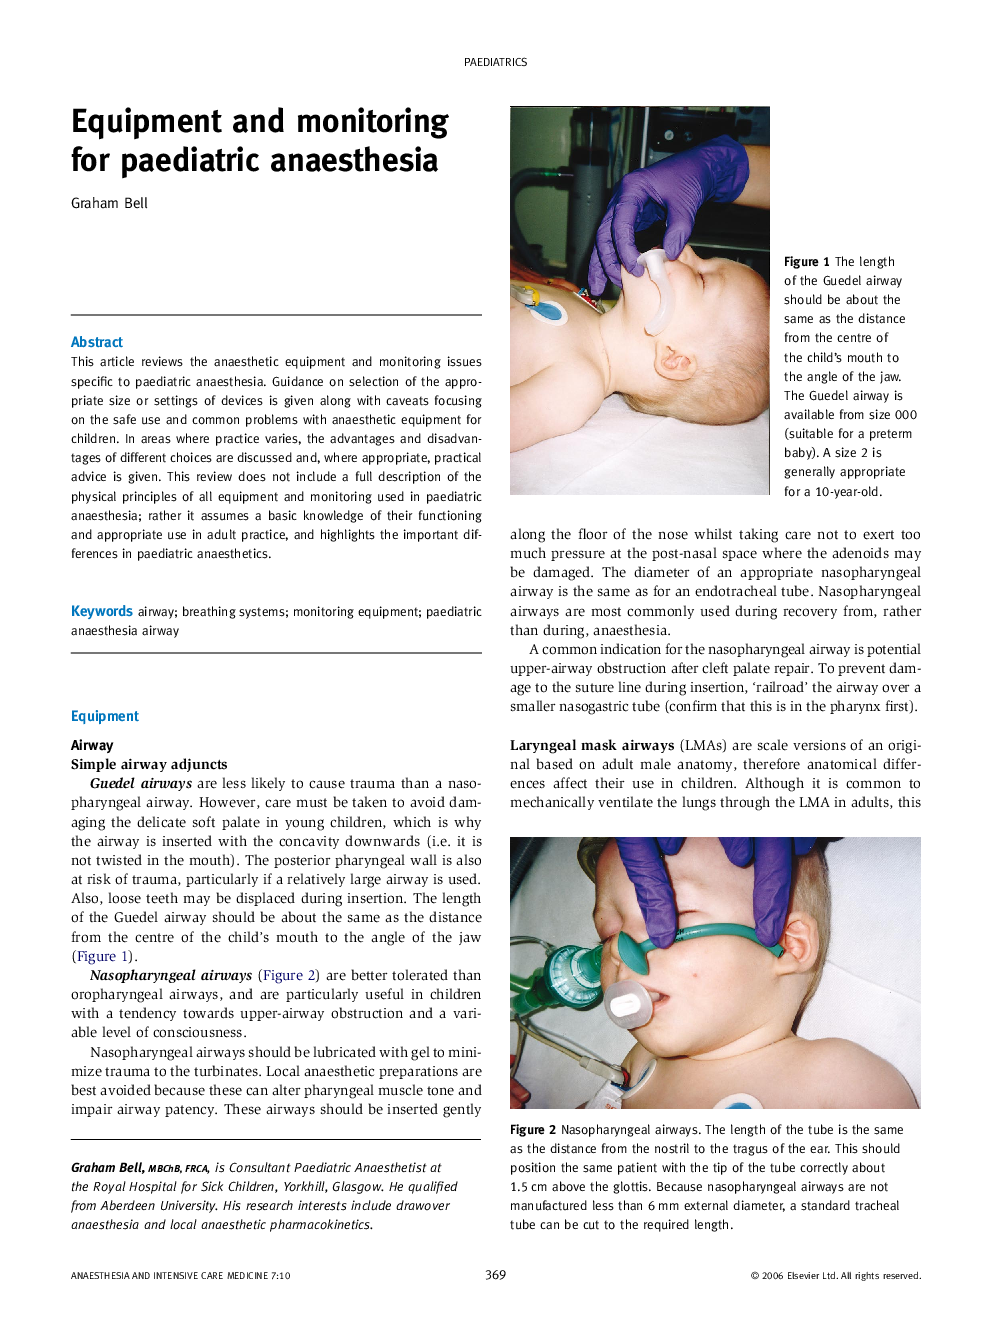 Equipment and monitoring for paediatric anaesthesia